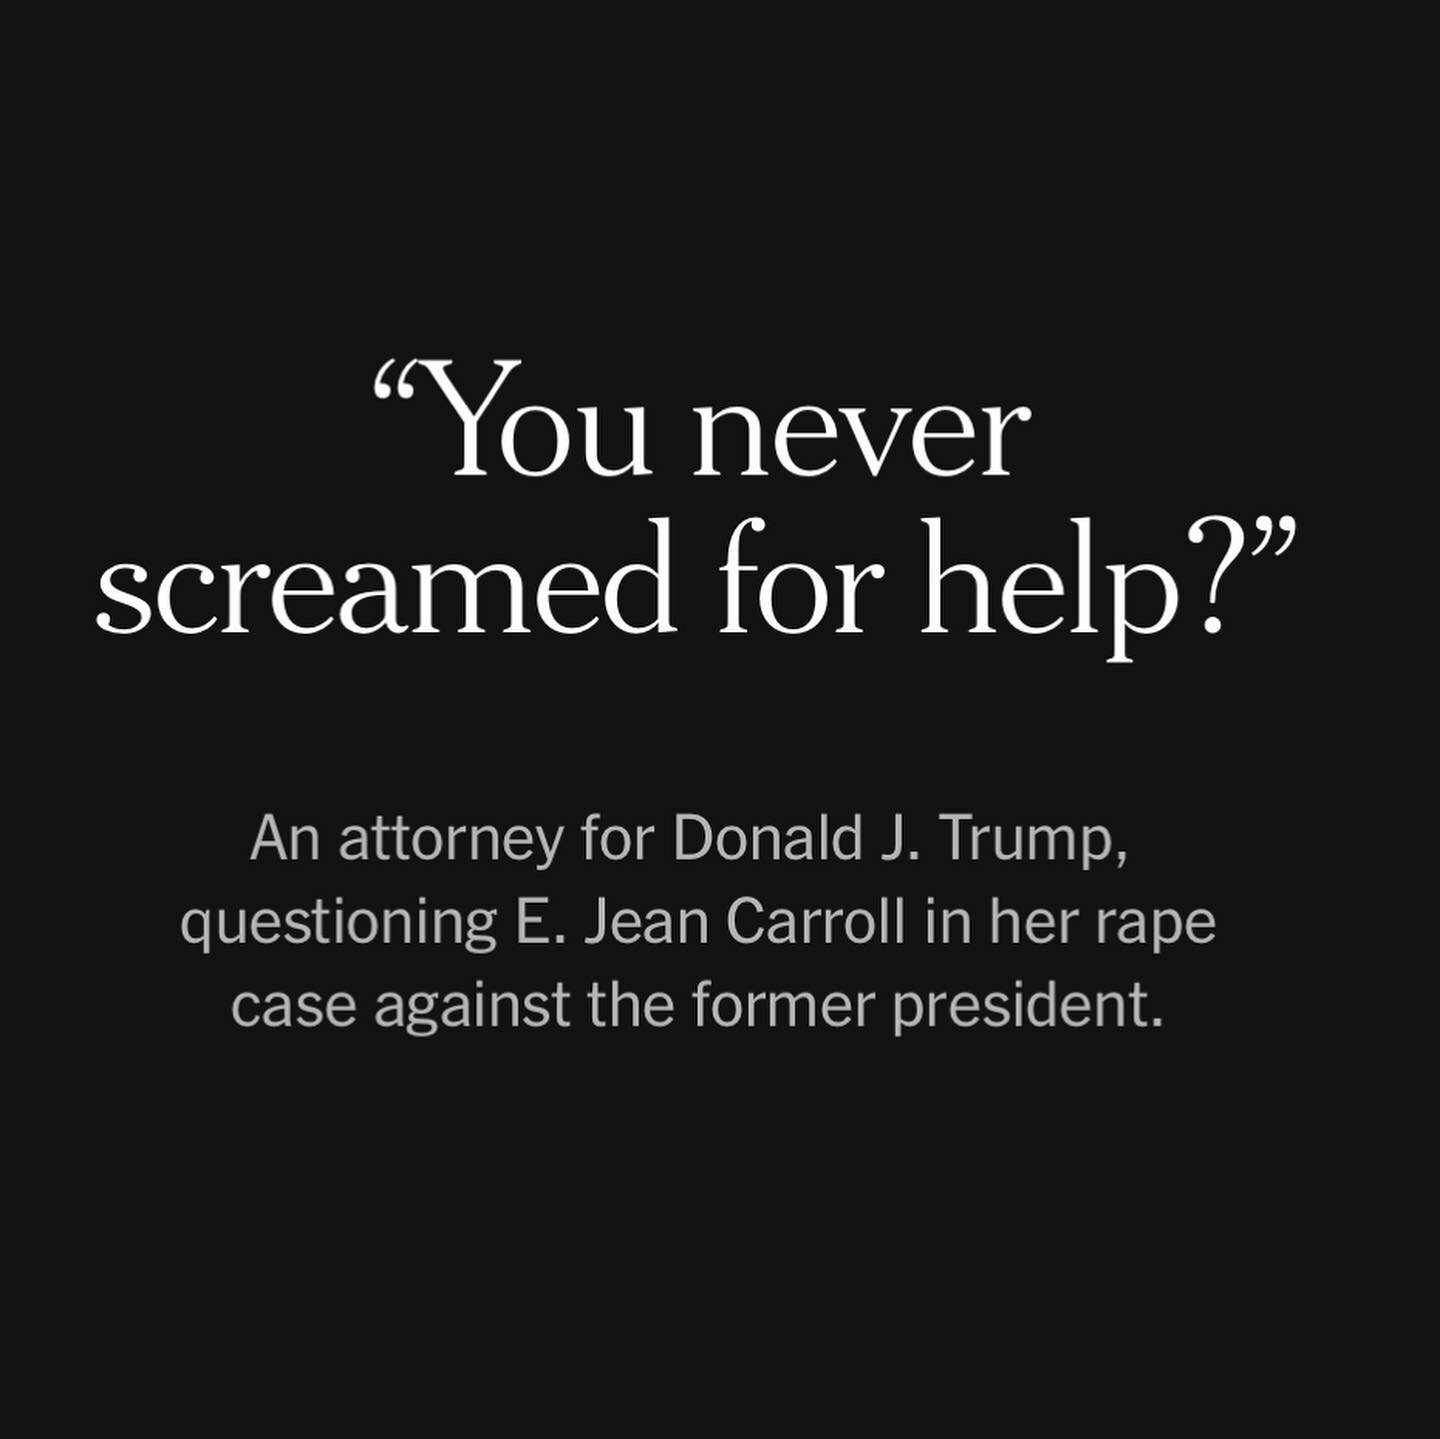 A little history:

The question of why rape victims don&rsquo;t scream (of which there are many reasons, among them fear or freezing) is one that can be traced as far back as the first rape trial in U.S. history for which there is a published record: